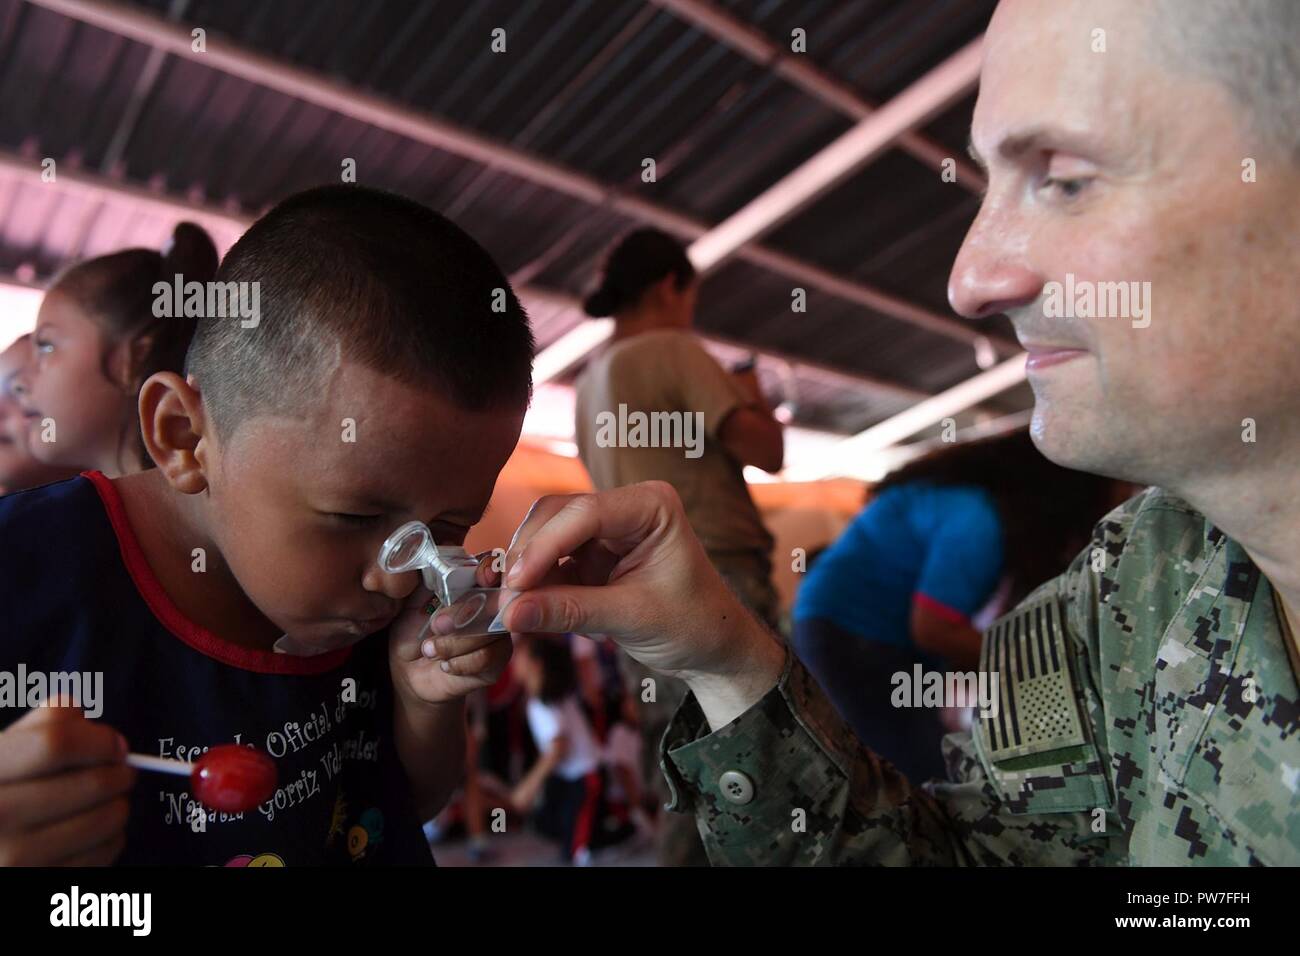 PUERTO BARRIOS, Guatemala (Sept. 22, 2017) Lt. Cmdr. Ian Sutherland, technical director for the Navy Entomology Center of Excellence, shows a student a mosquito specimen at Escuela Natalia Corriz Viuda de Morales, a Guatemalan primary school, during a Southern Partnership Station 17 community relations project (COMREL). SPS 17 is a U.S. Navy deployment executed by U.S. Naval Forces Southern Command/U.S. 4th Fleet, focused on subject matter expert exchanges with partner nation militaries and security forces in Central and South America. Stock Photo